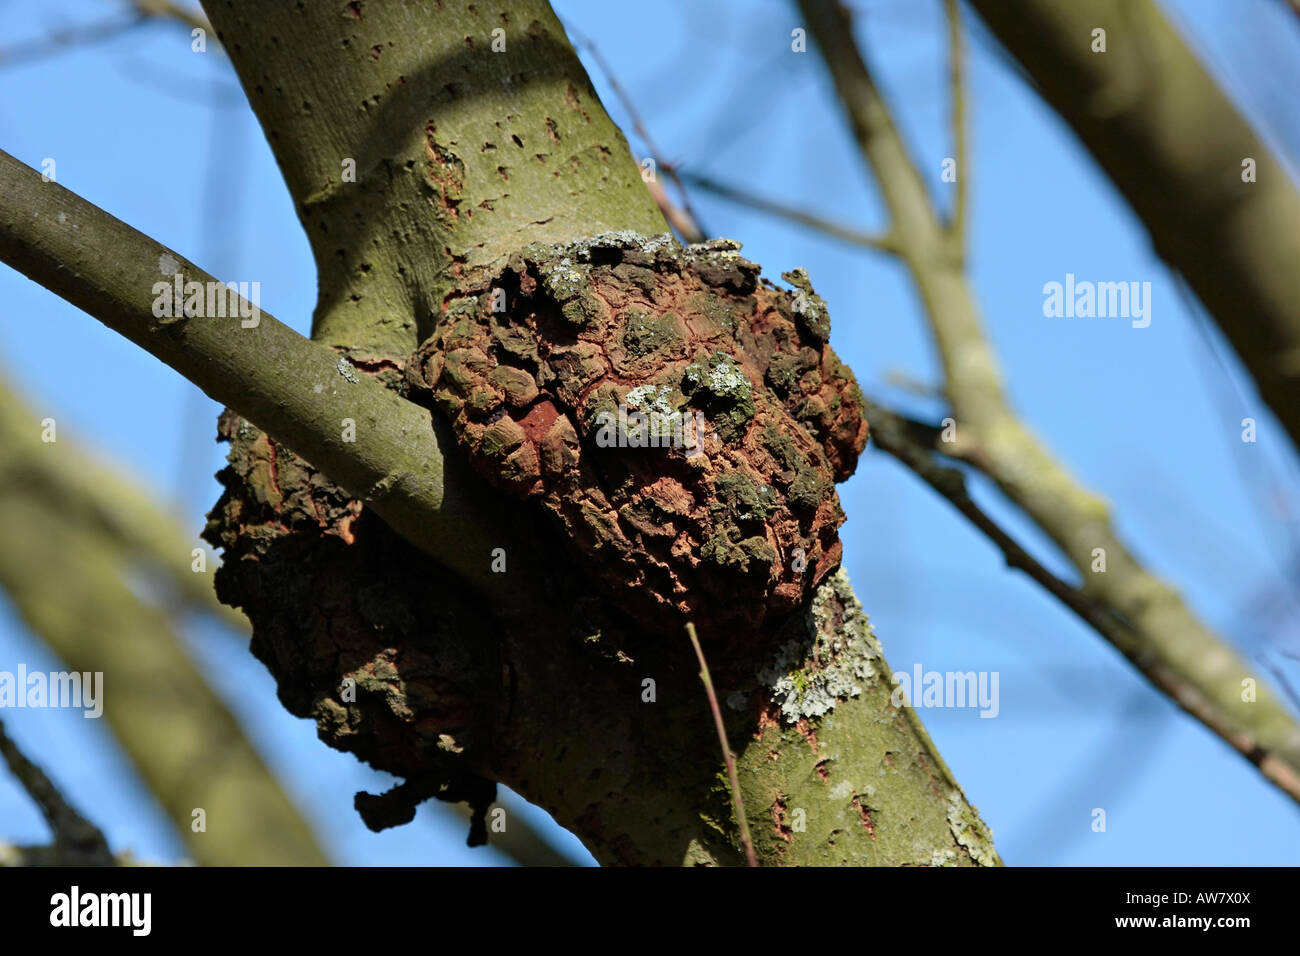 Tree Gall High Resolution Stock Photography and Images - Alamy